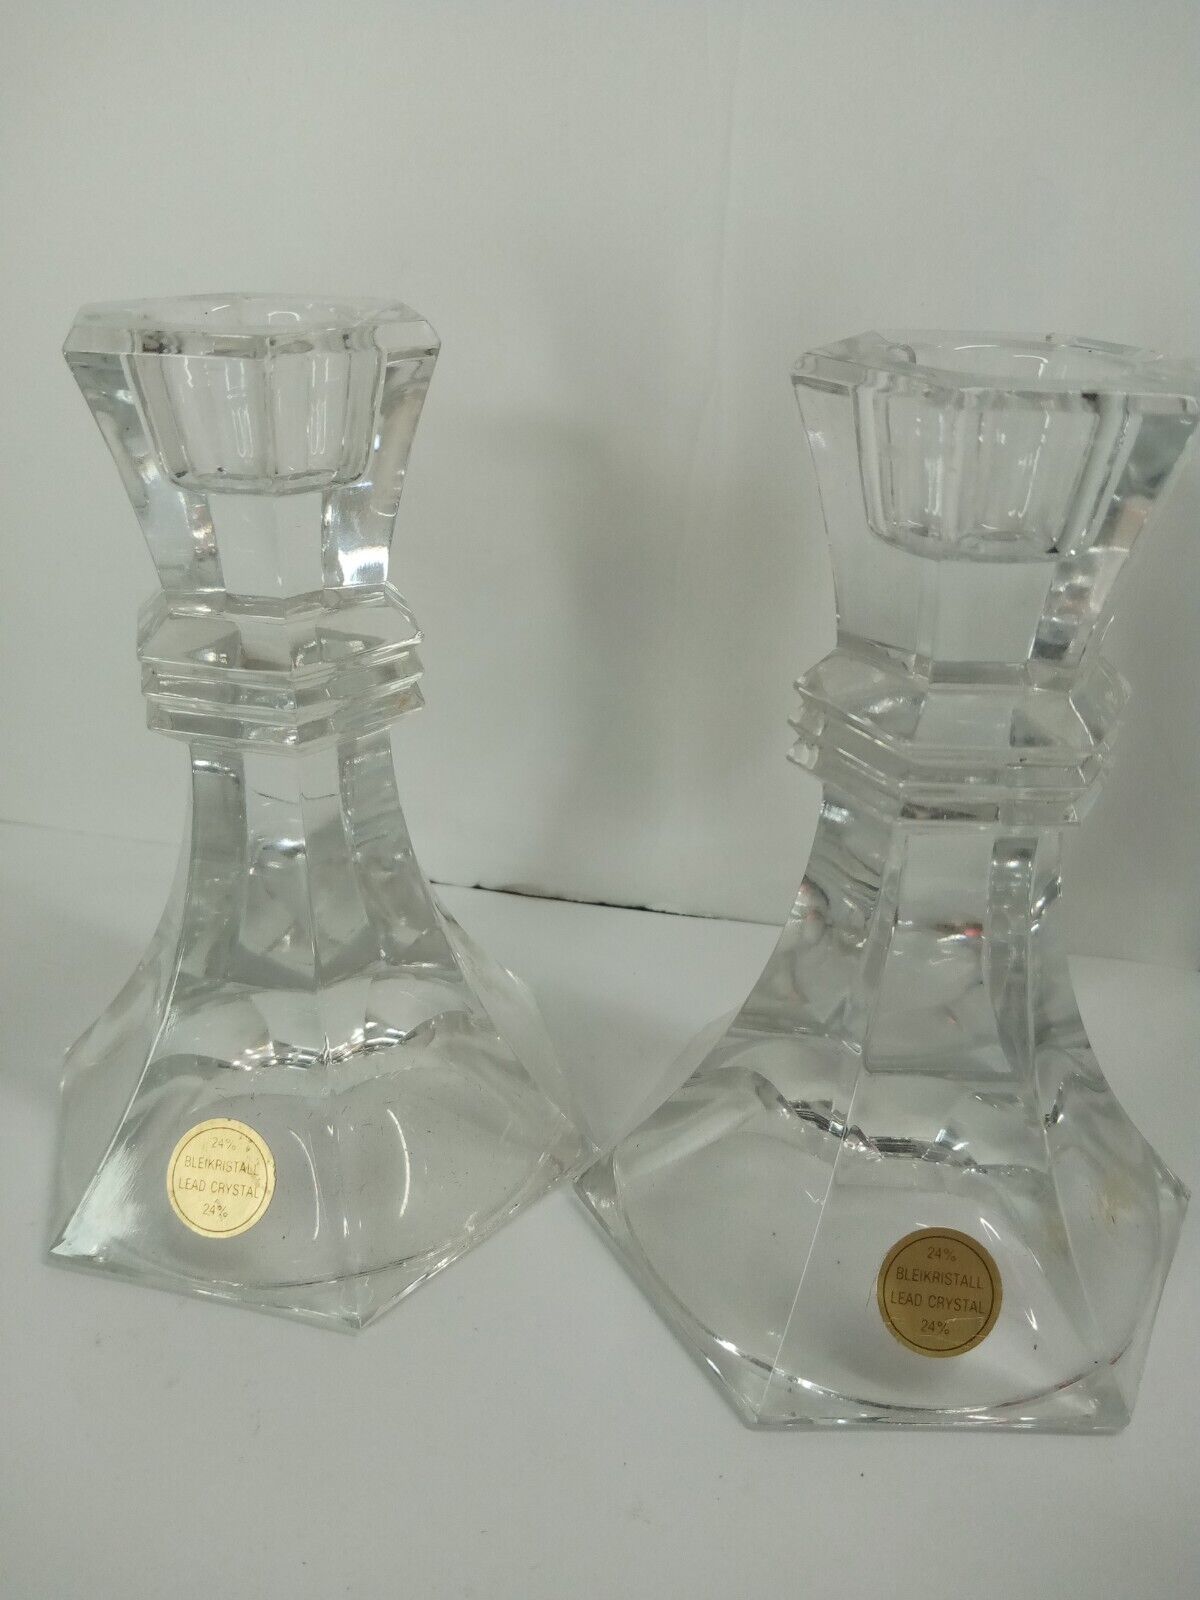 Bleikristall 24 Lead Crystal Candle Holders set of 2 Taper Candles Candlesticks